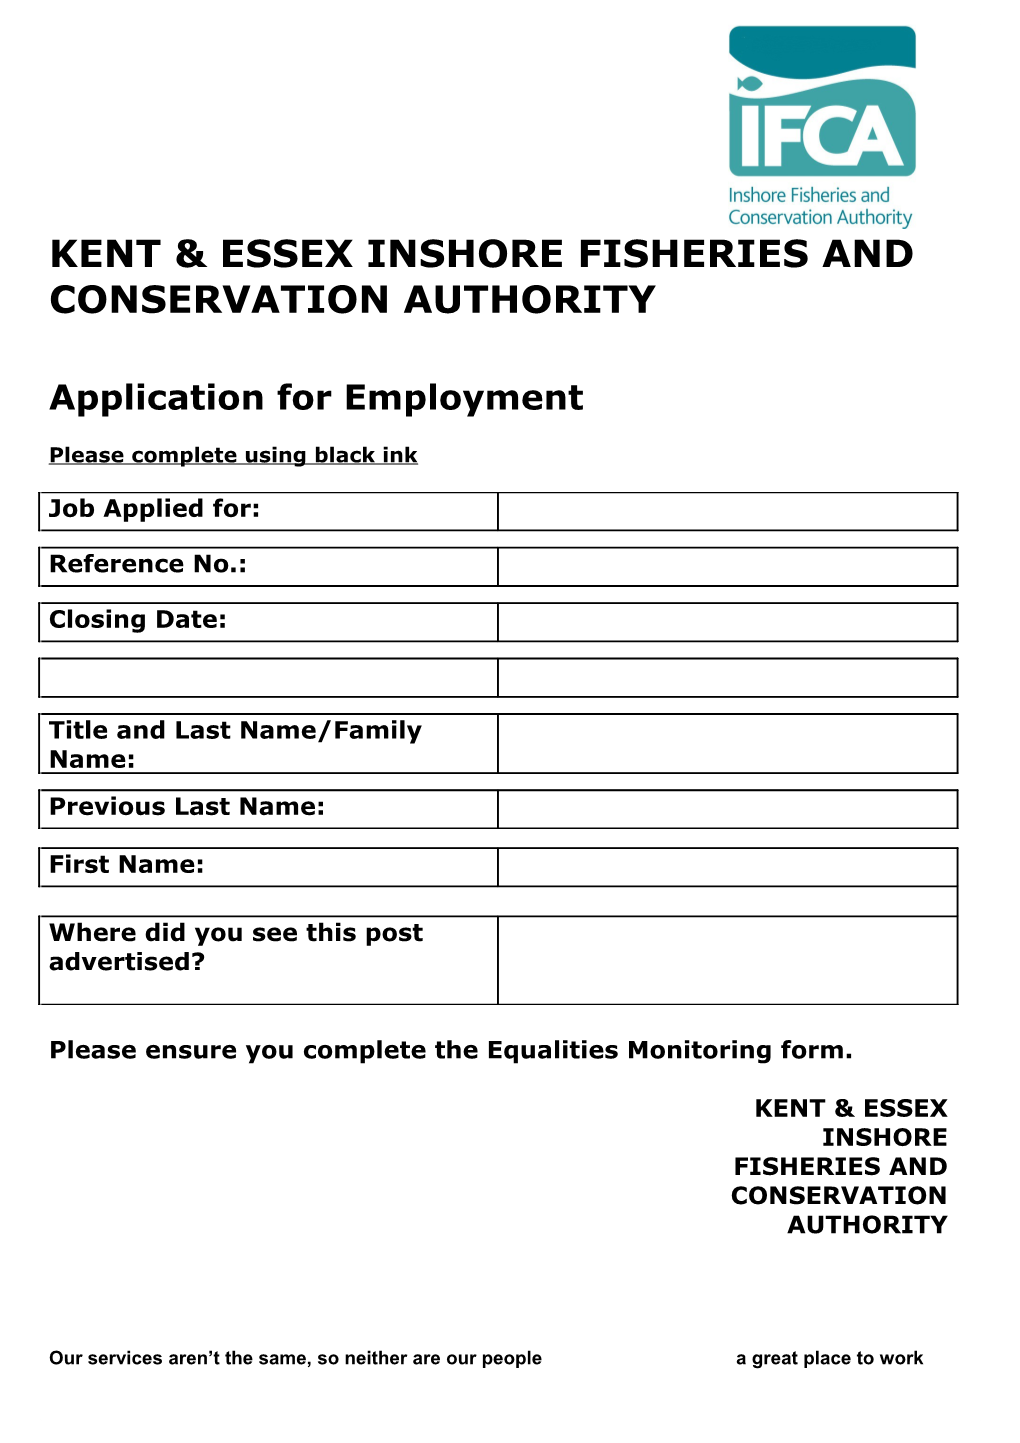 Kent Essex Inshore Fisheries and Conservation Authority